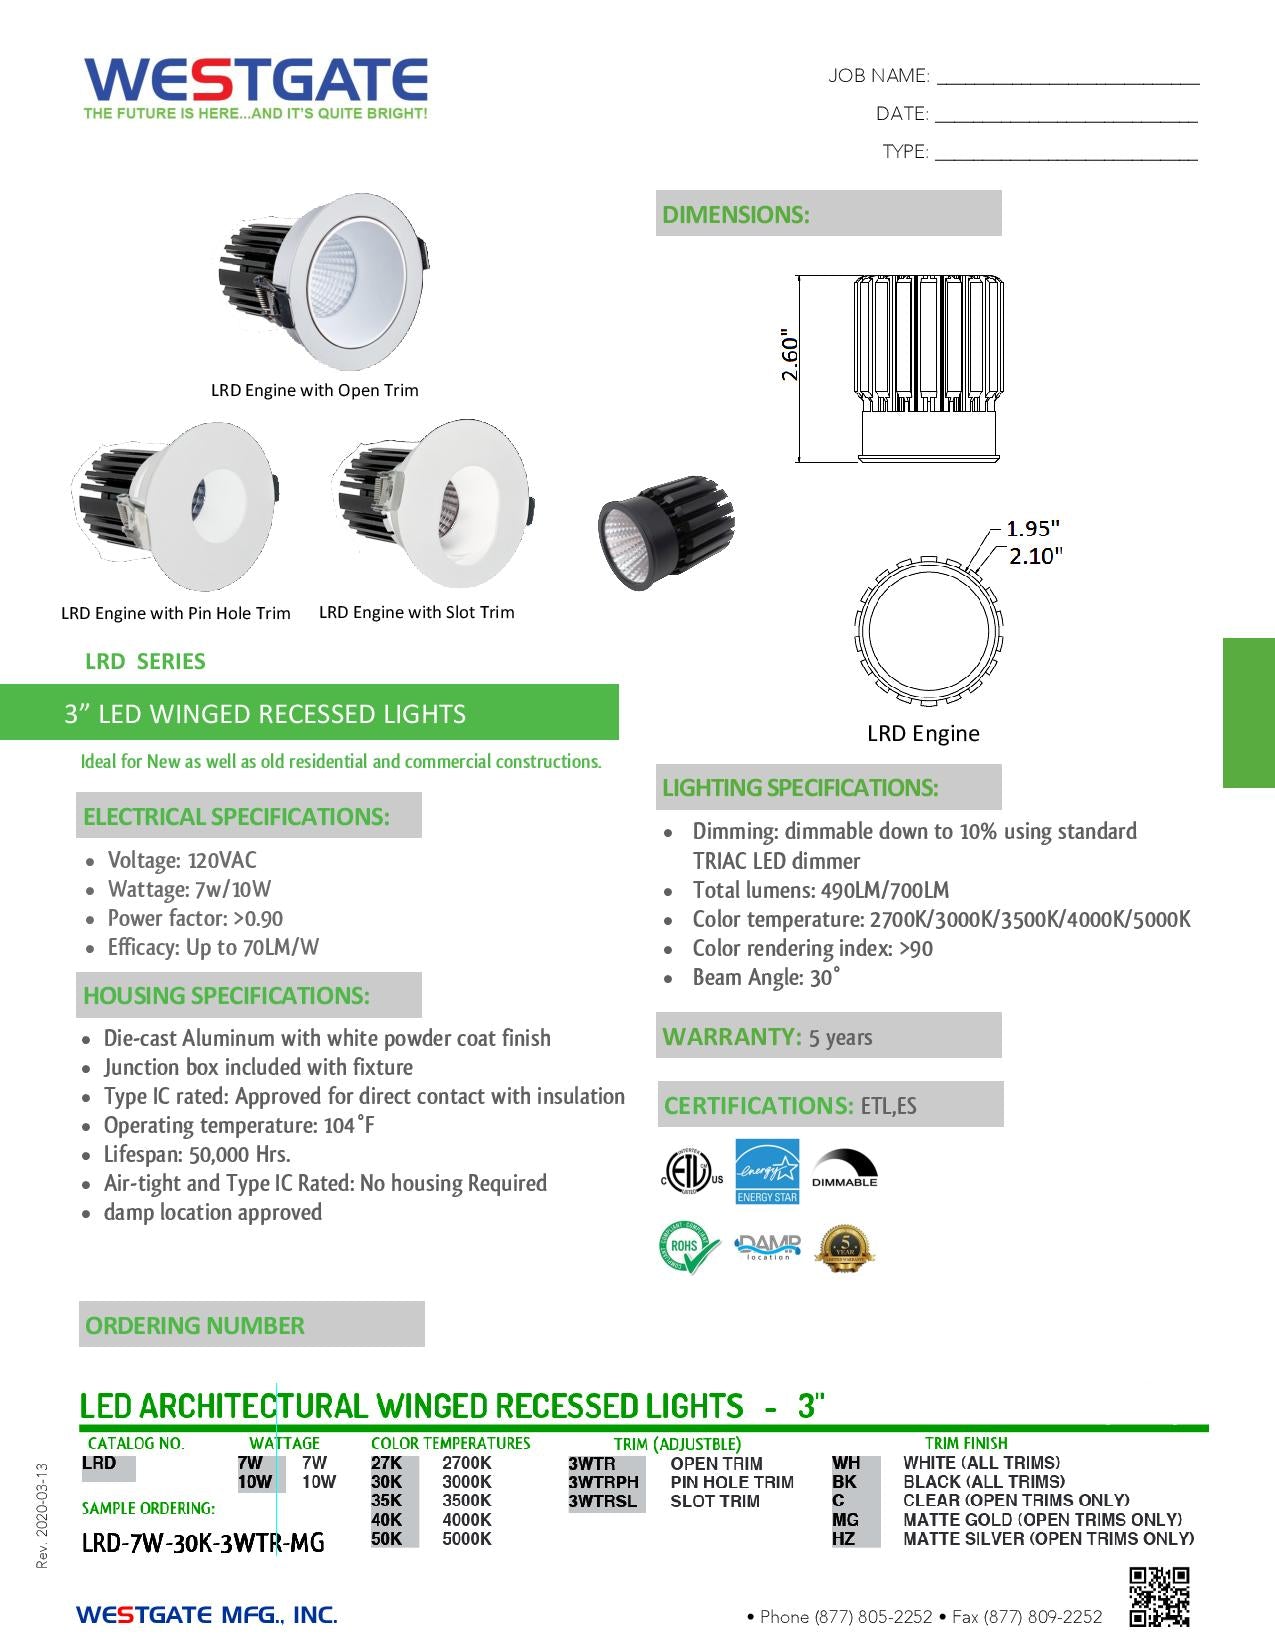 LED 3" Architectural Winged Recessed Lights - Open Trim